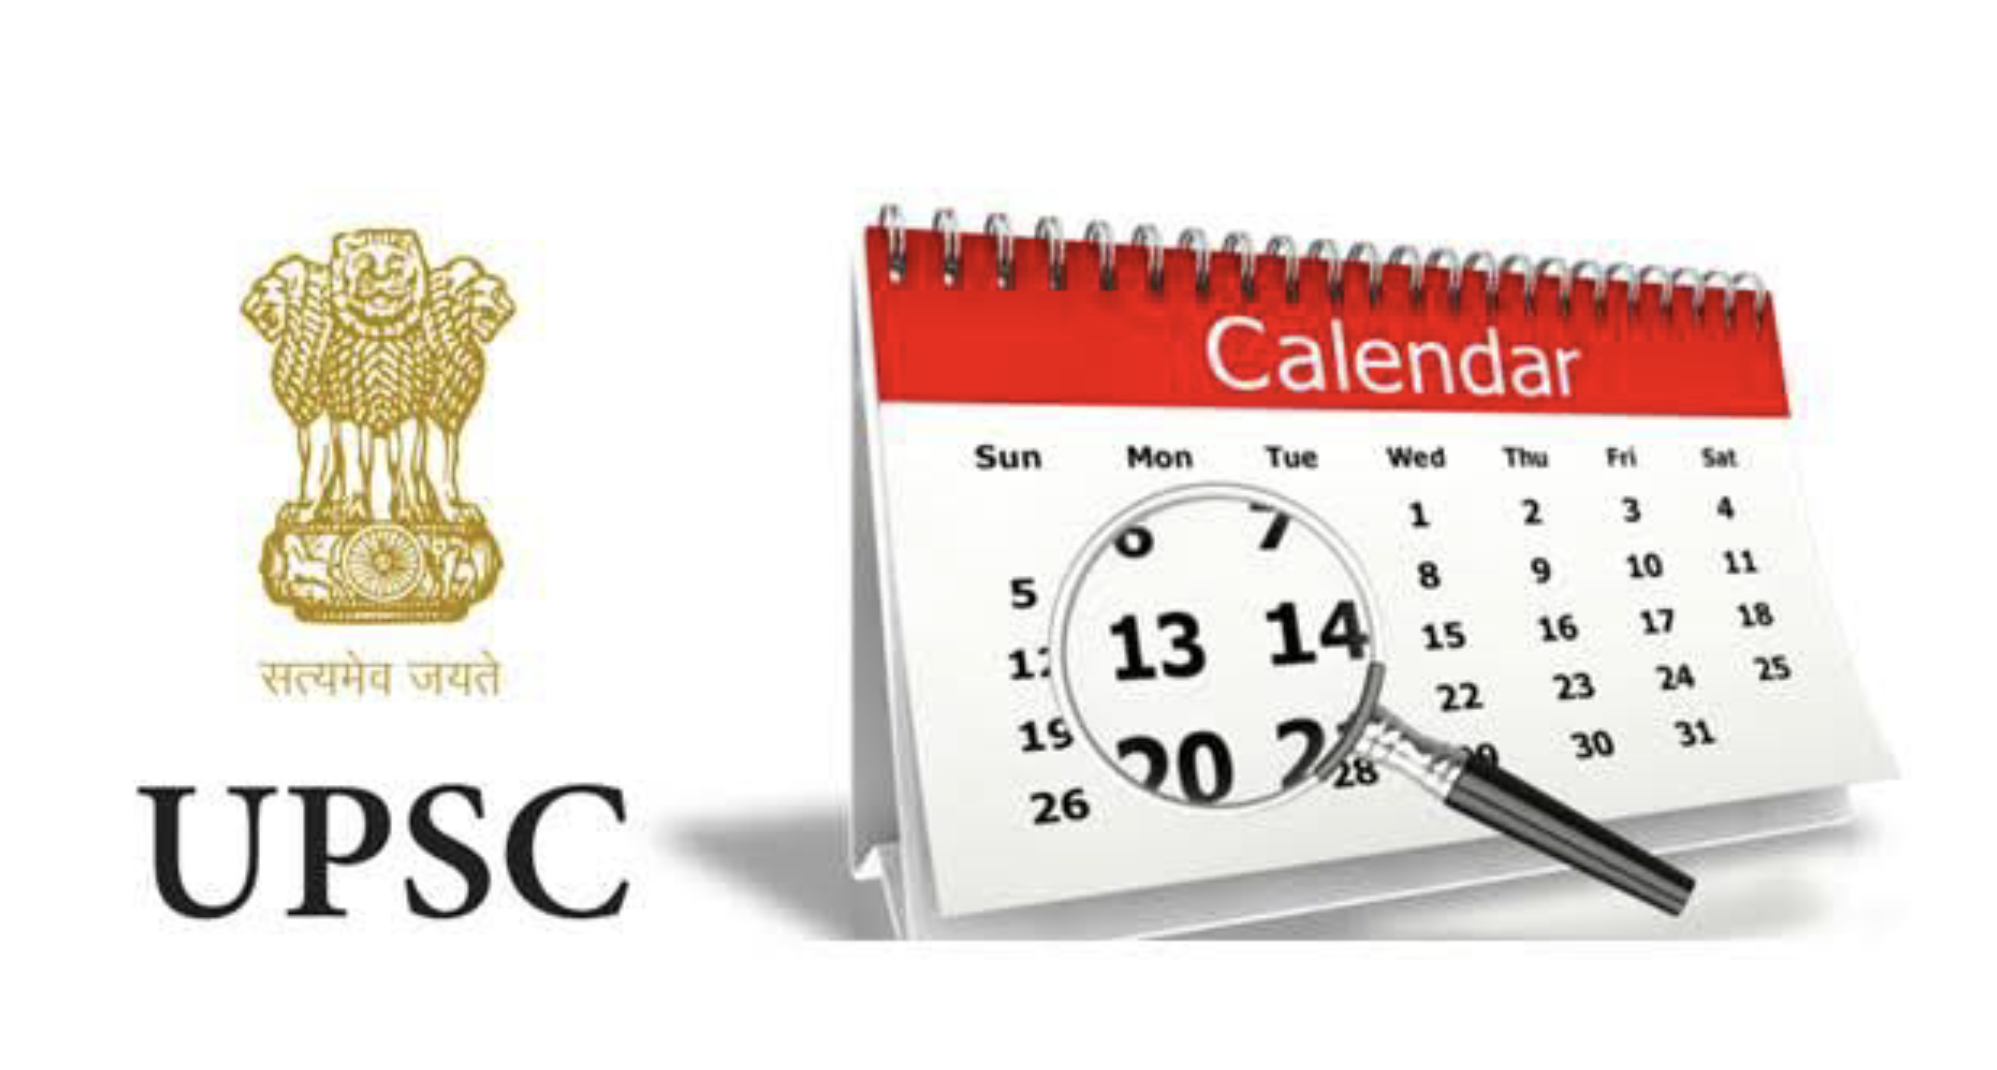 UPSC CALENDAR 2022: DATES FOR CSE AND IFoS EXAM RELEASED